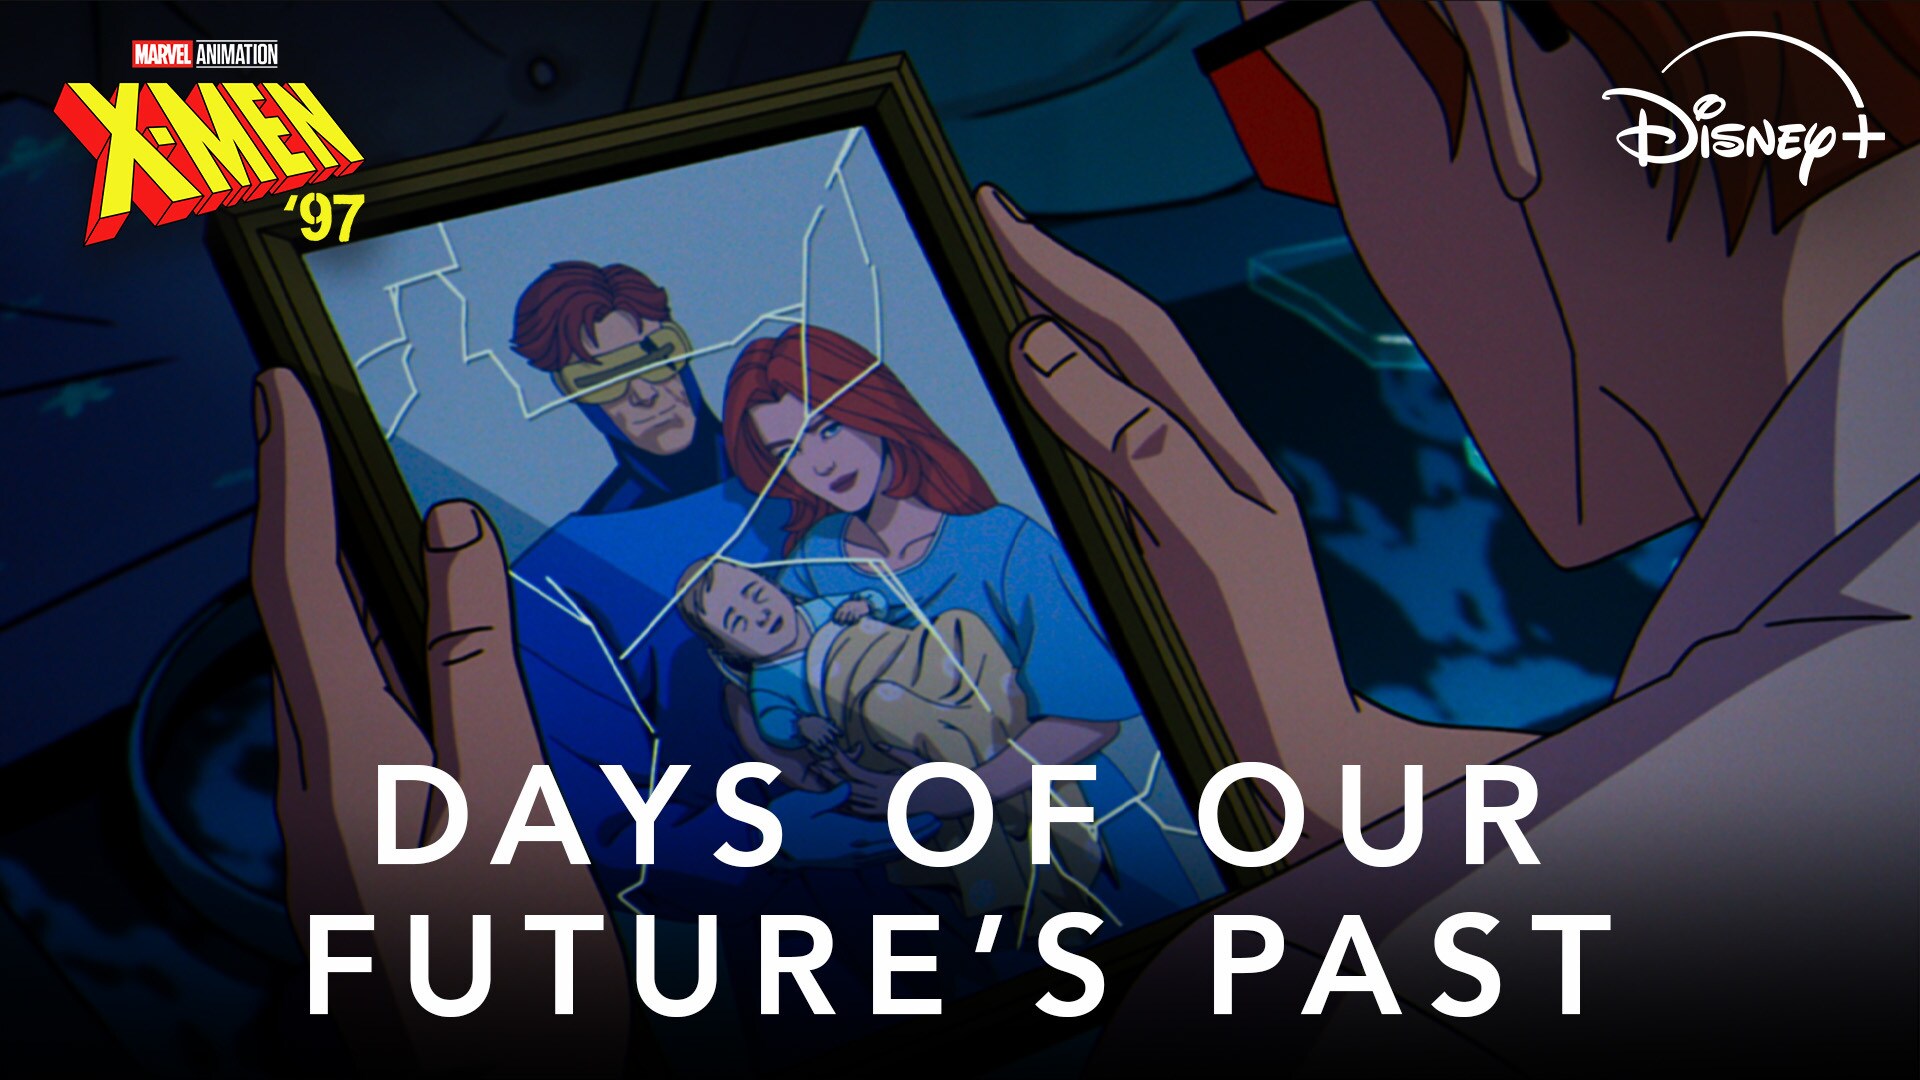 Marvel Animation's X-Men '97 | Days of Our Future’s Past | Disney+